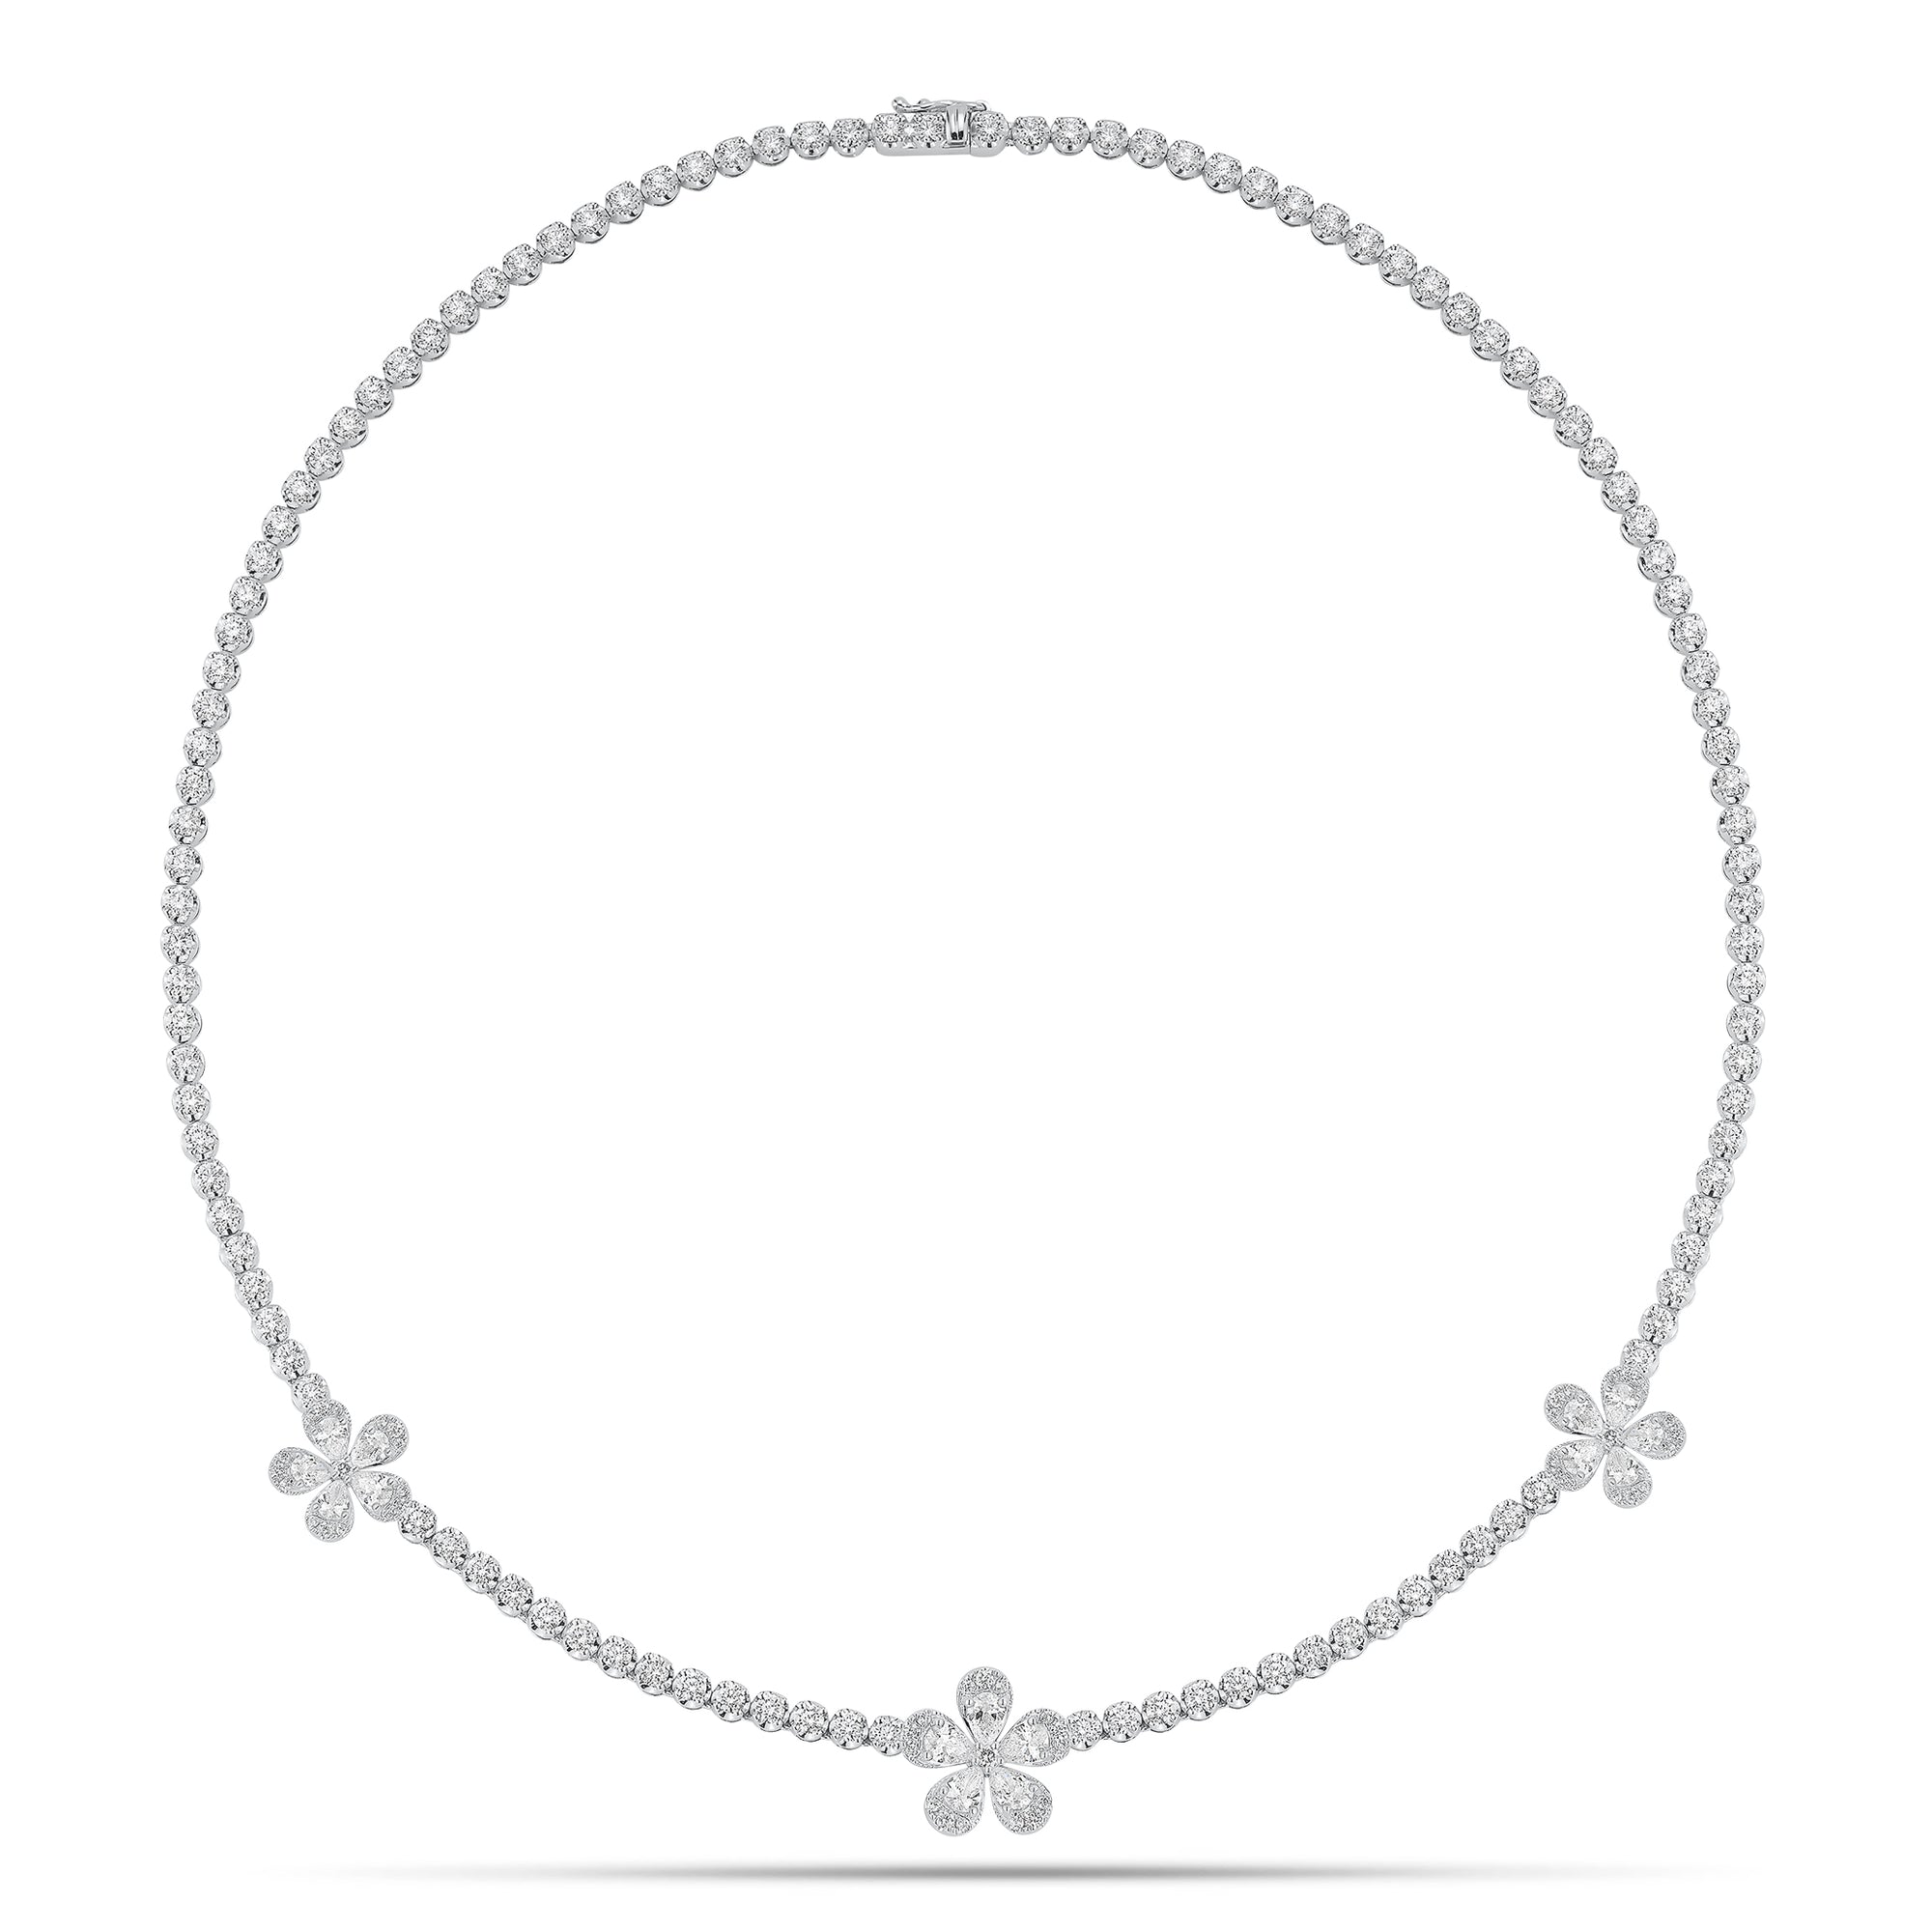 Diamond Flower Tennis Necklace - 18K gold weighing 20.02 grams  - 15 pear-shaped diamonds weighing 1.55 carats  - 115 round diamonds weighing 5.76 carats  - 48 round diamonds weighing 3.50 carats